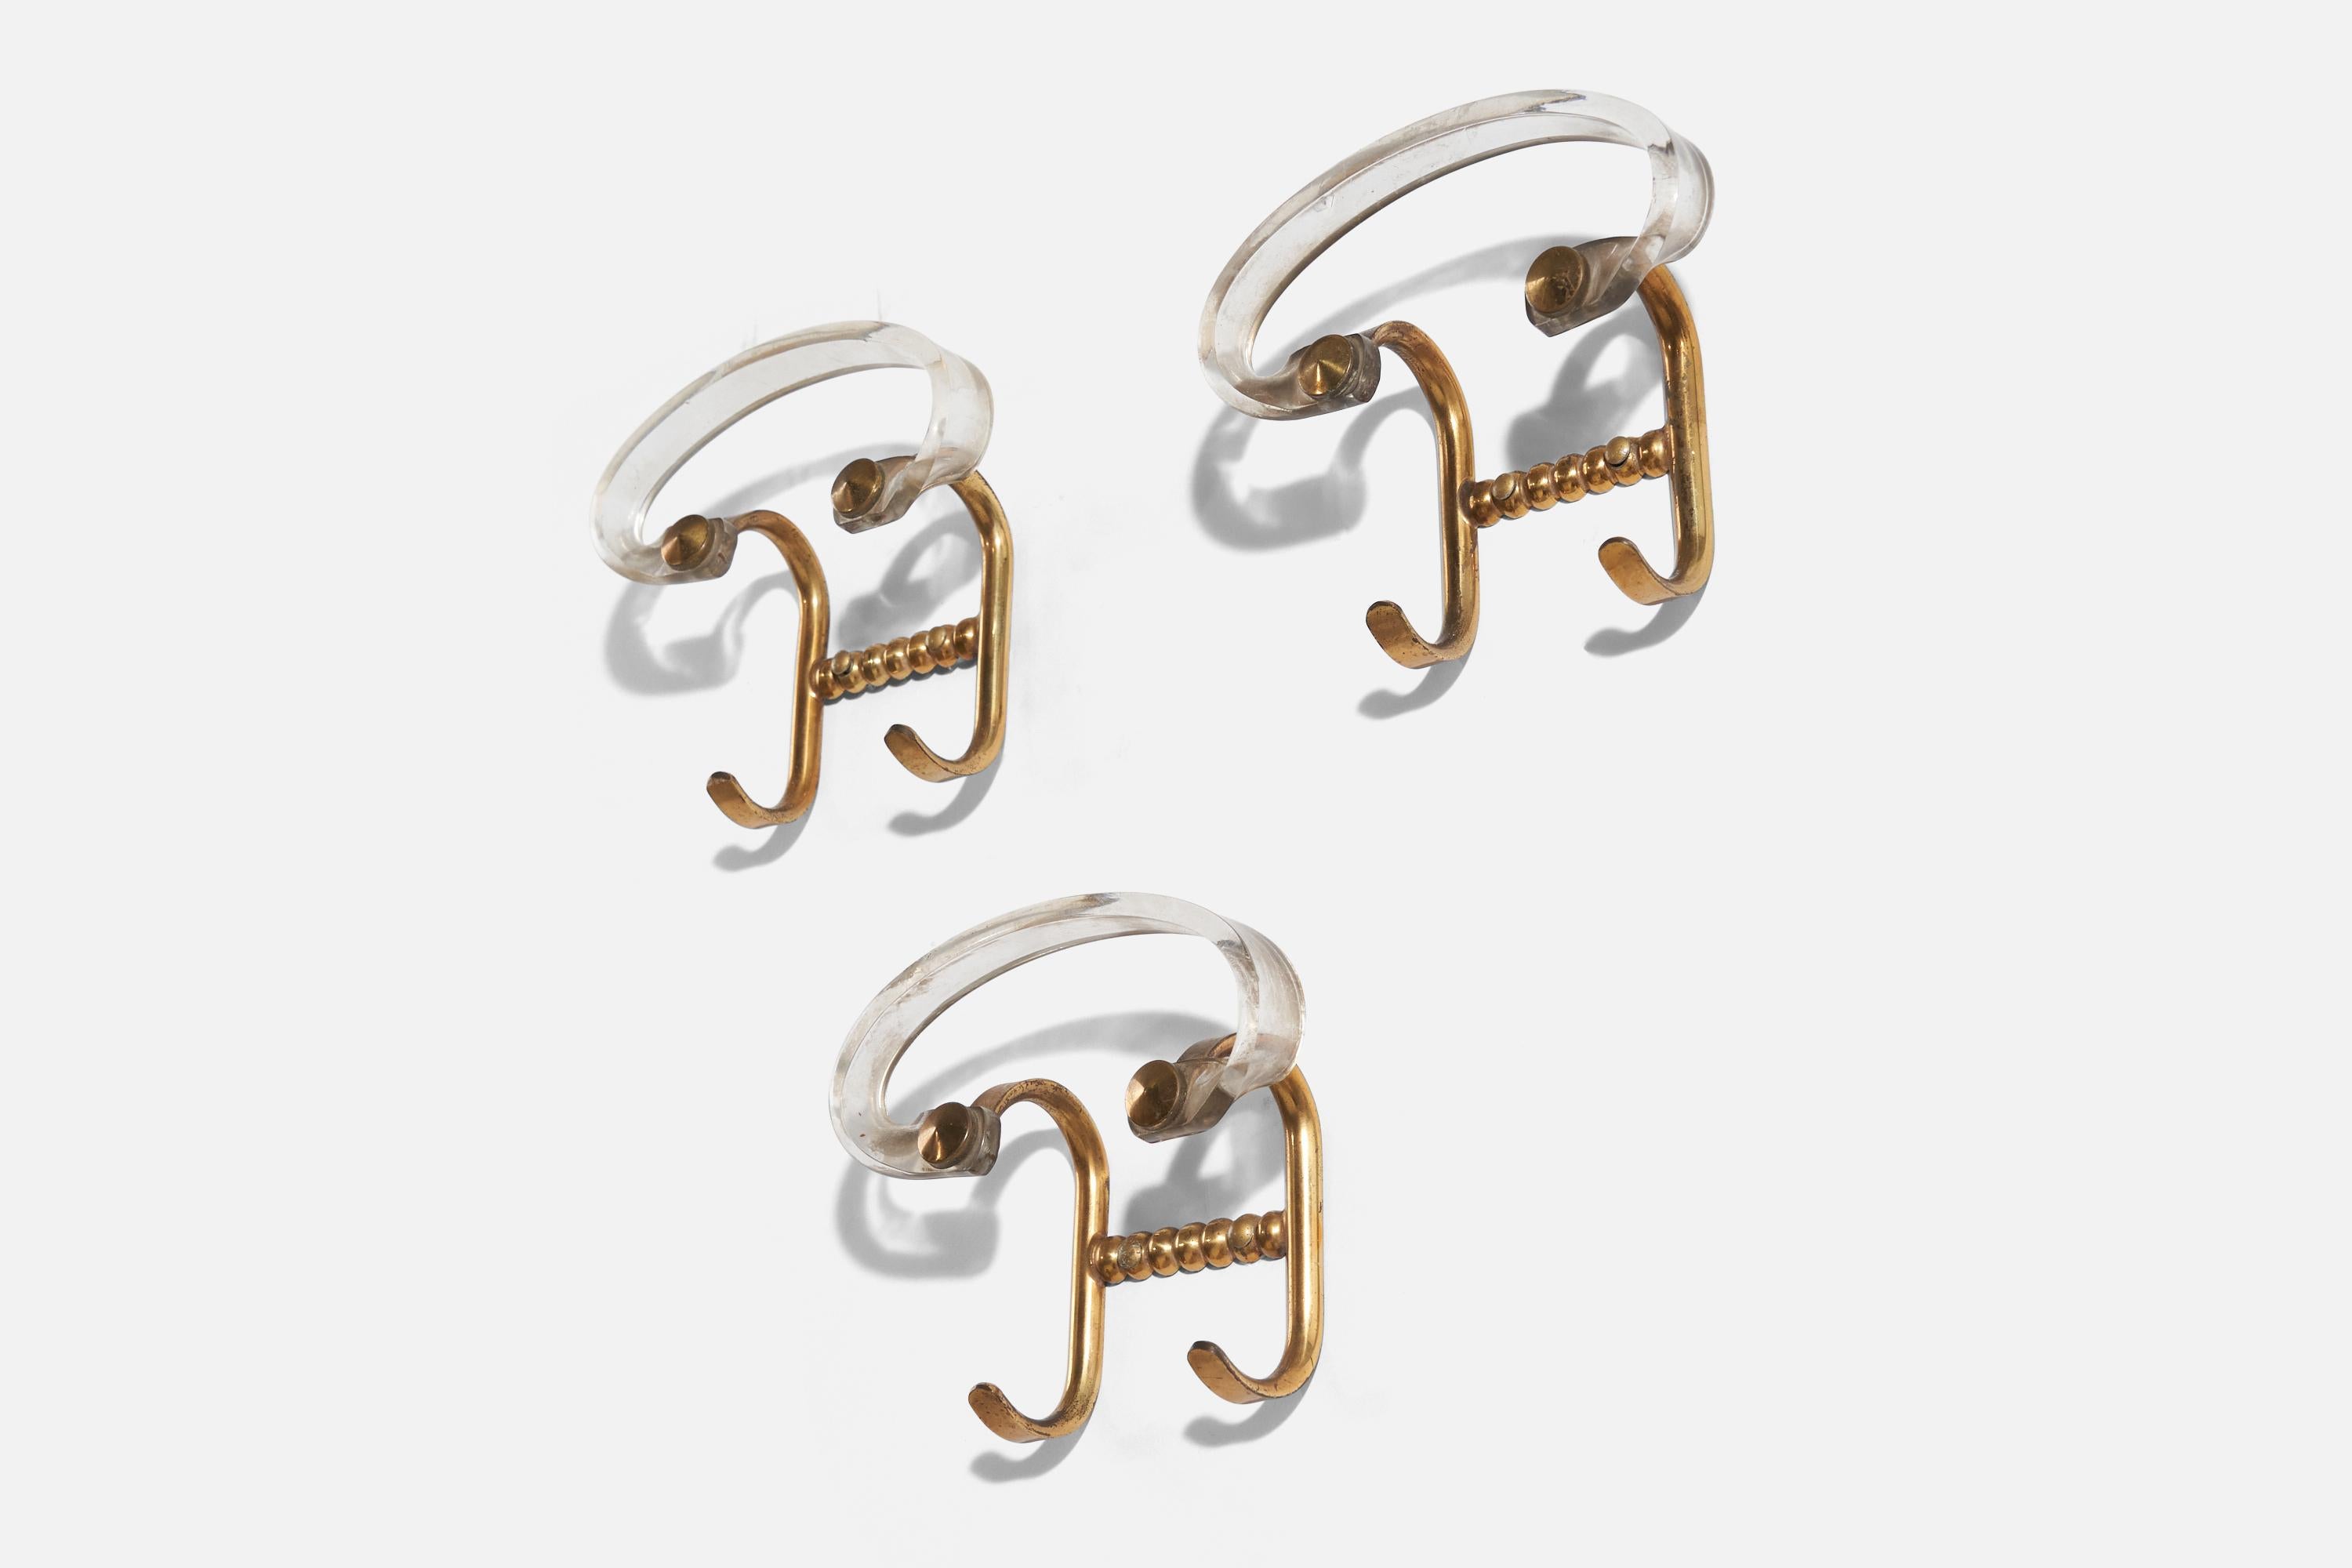 A set of three brass and acrylic coat hangers, designed and produced by an Italian designer, Italy, 1940s.